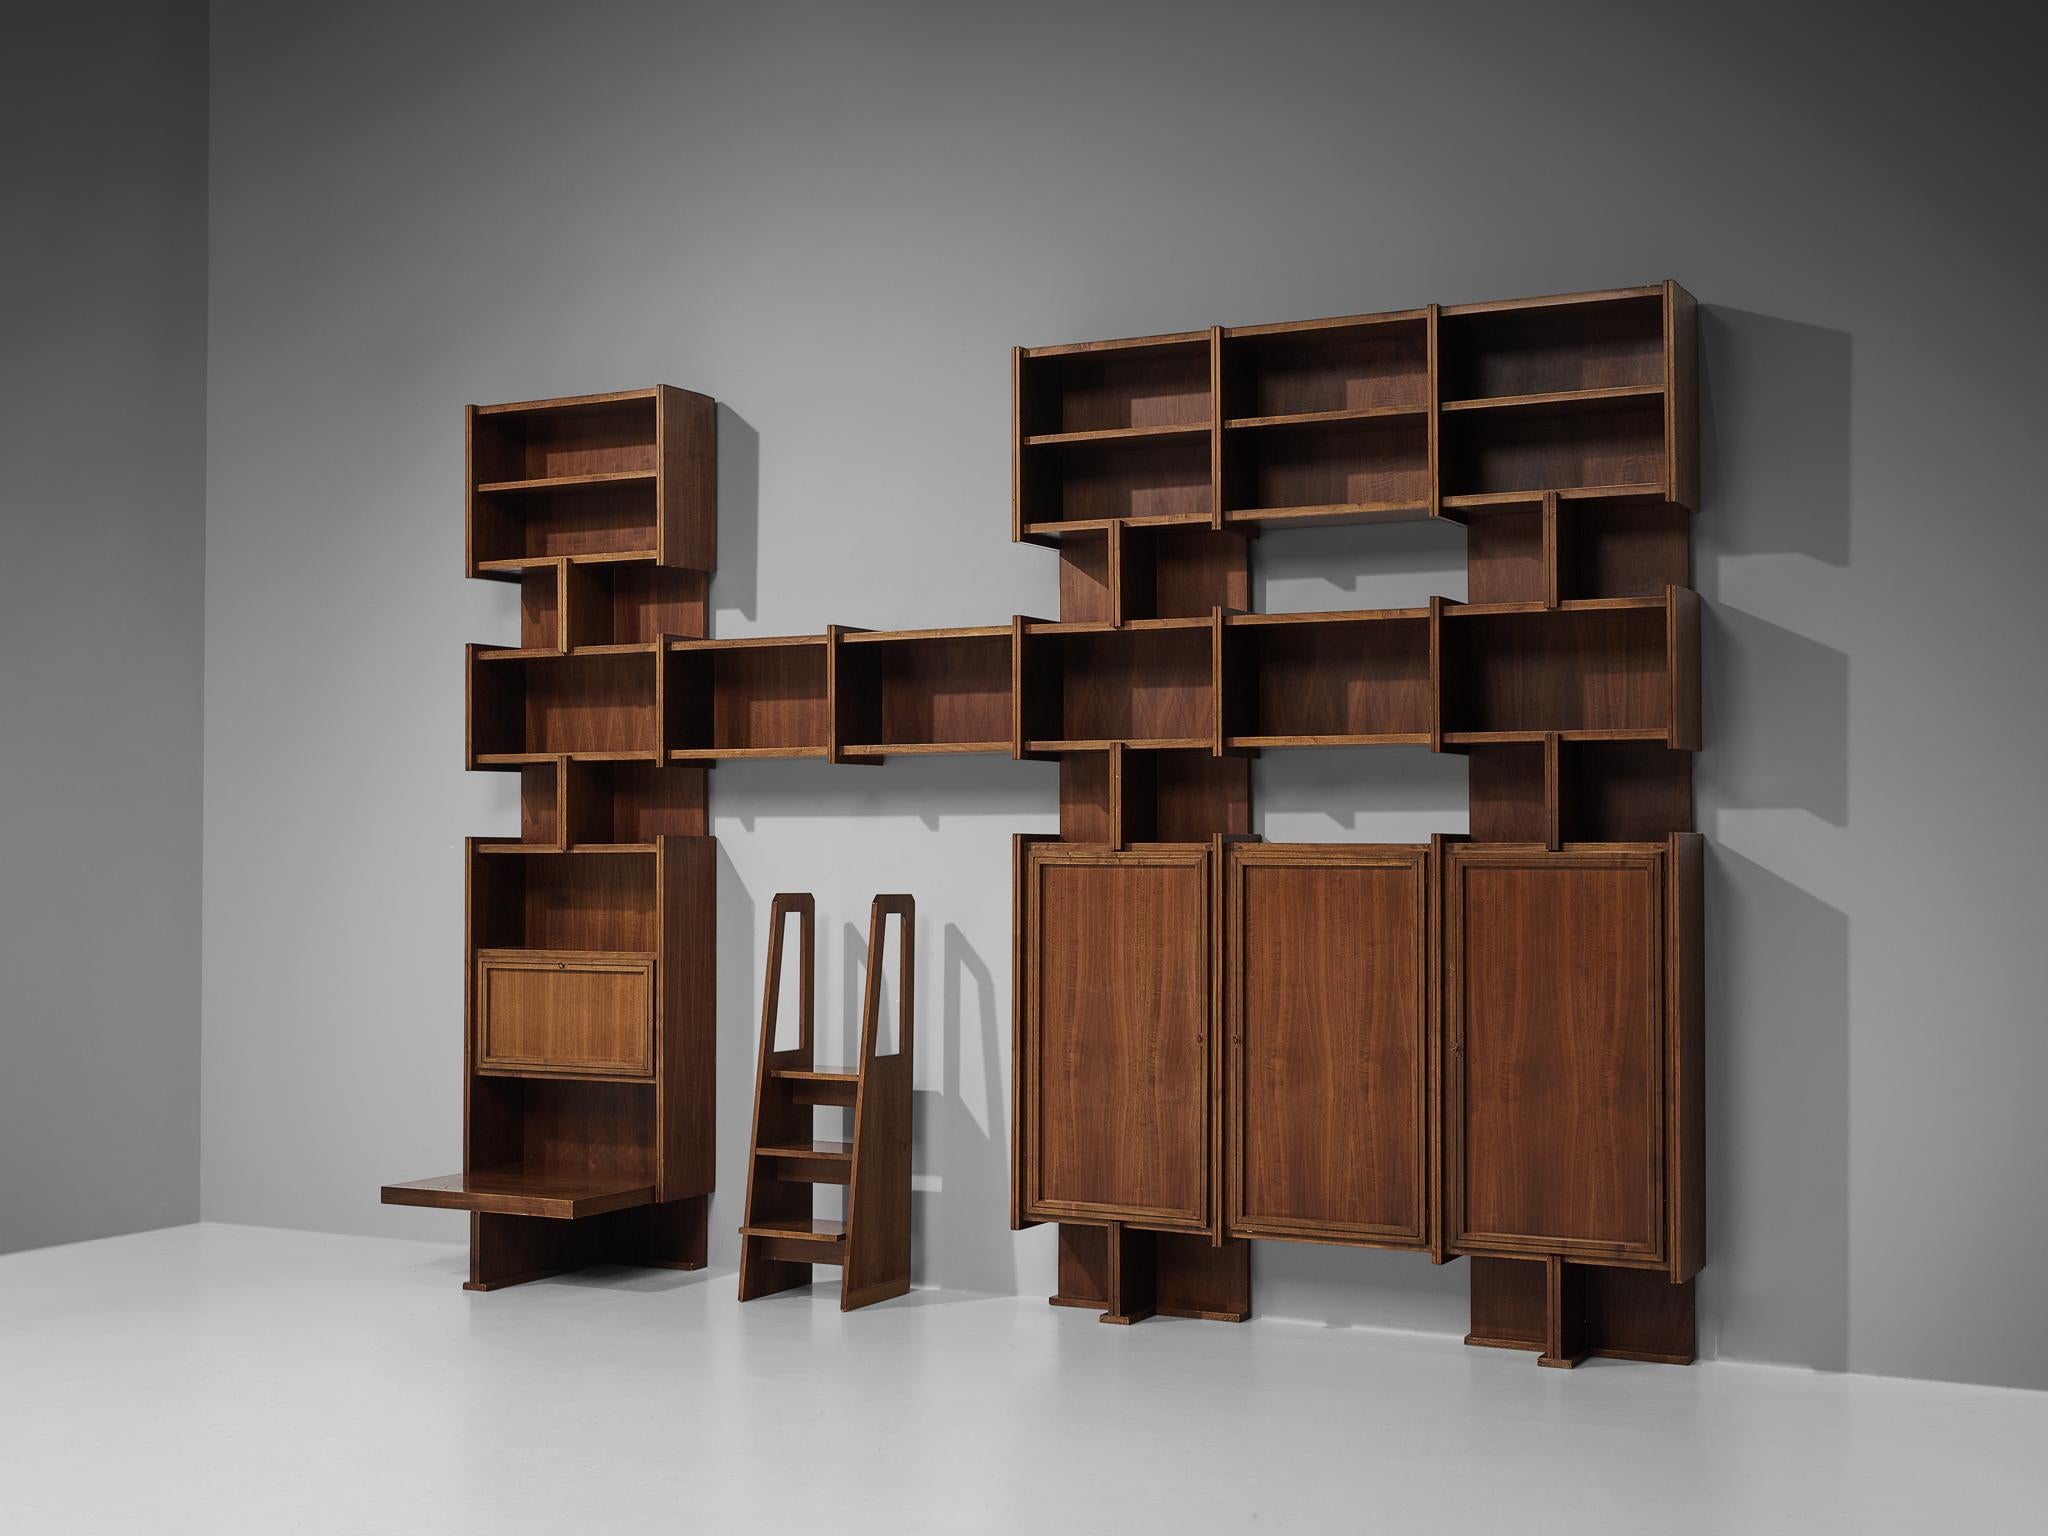 Library unit with stairs, walnut, Italy, 1950s.

Extraordinary Italian library unit including a stairs, all executed in the finest walnut wood. The look of this wall unit is very versatile in the way that multiple features are composed together as a